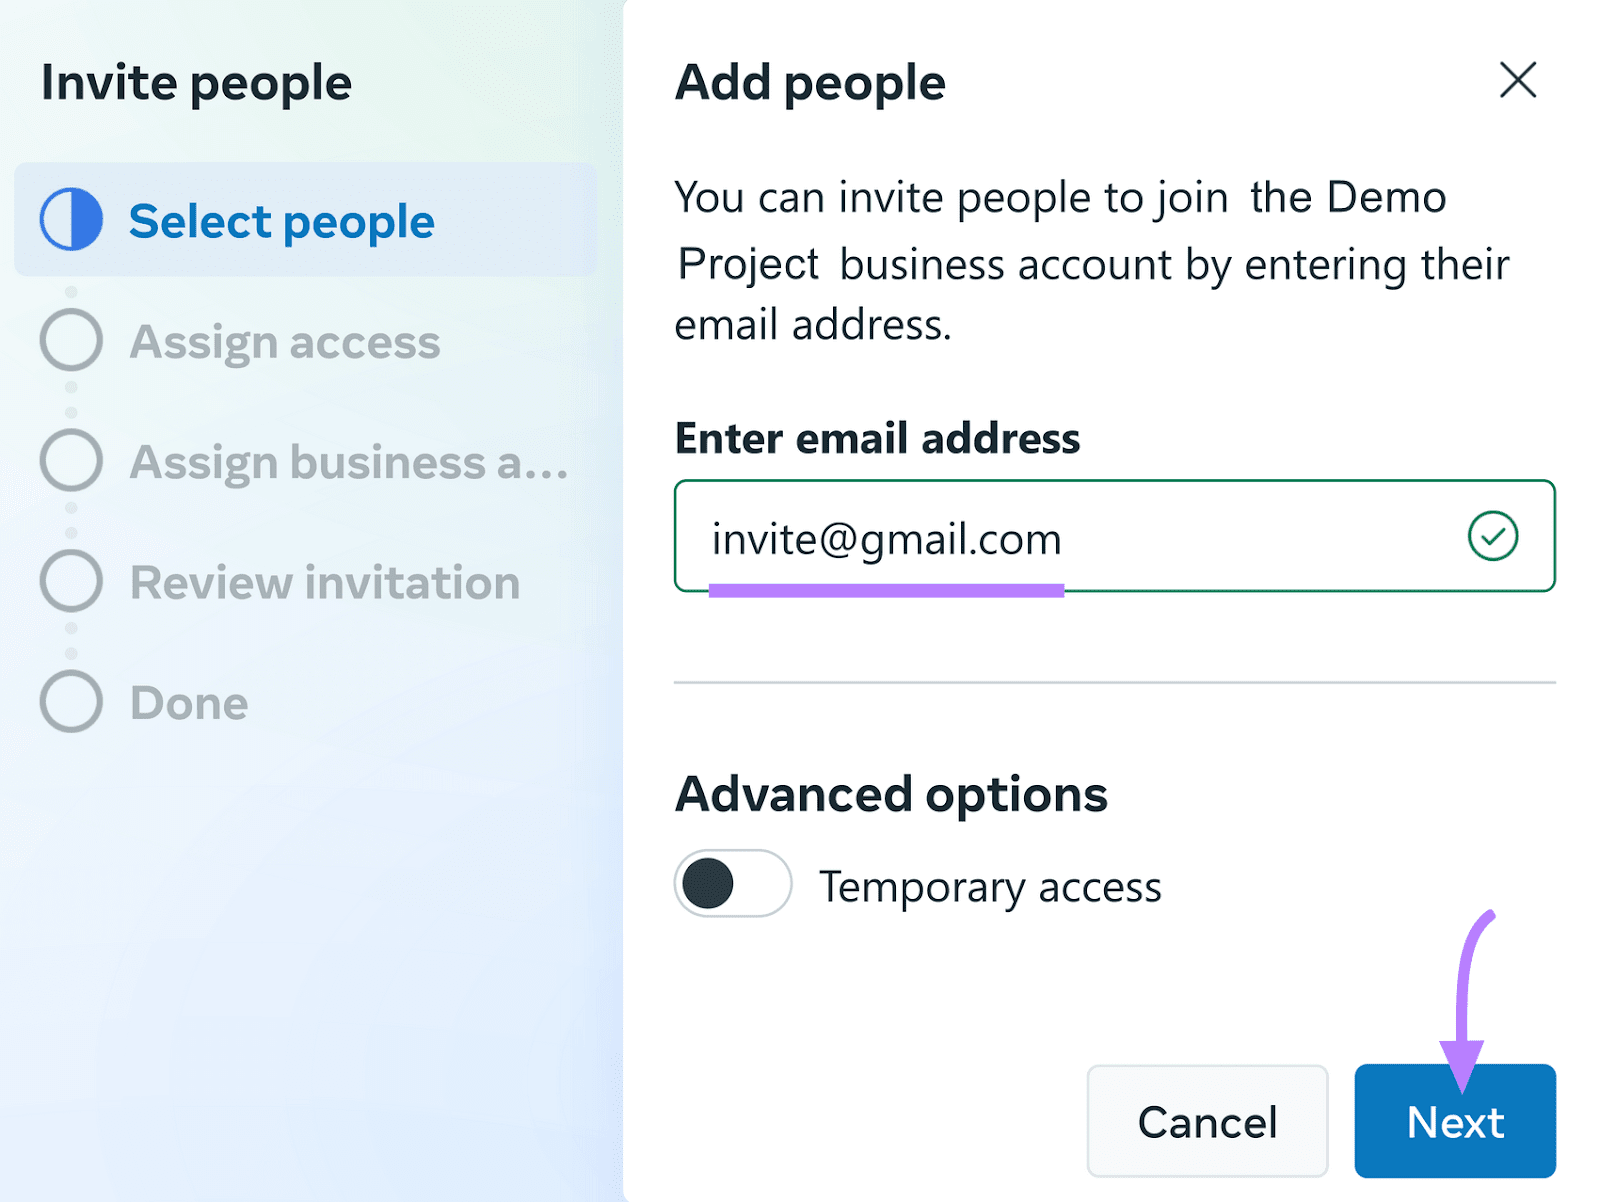 "invite@example.com" entered under the email field under "Add people" window